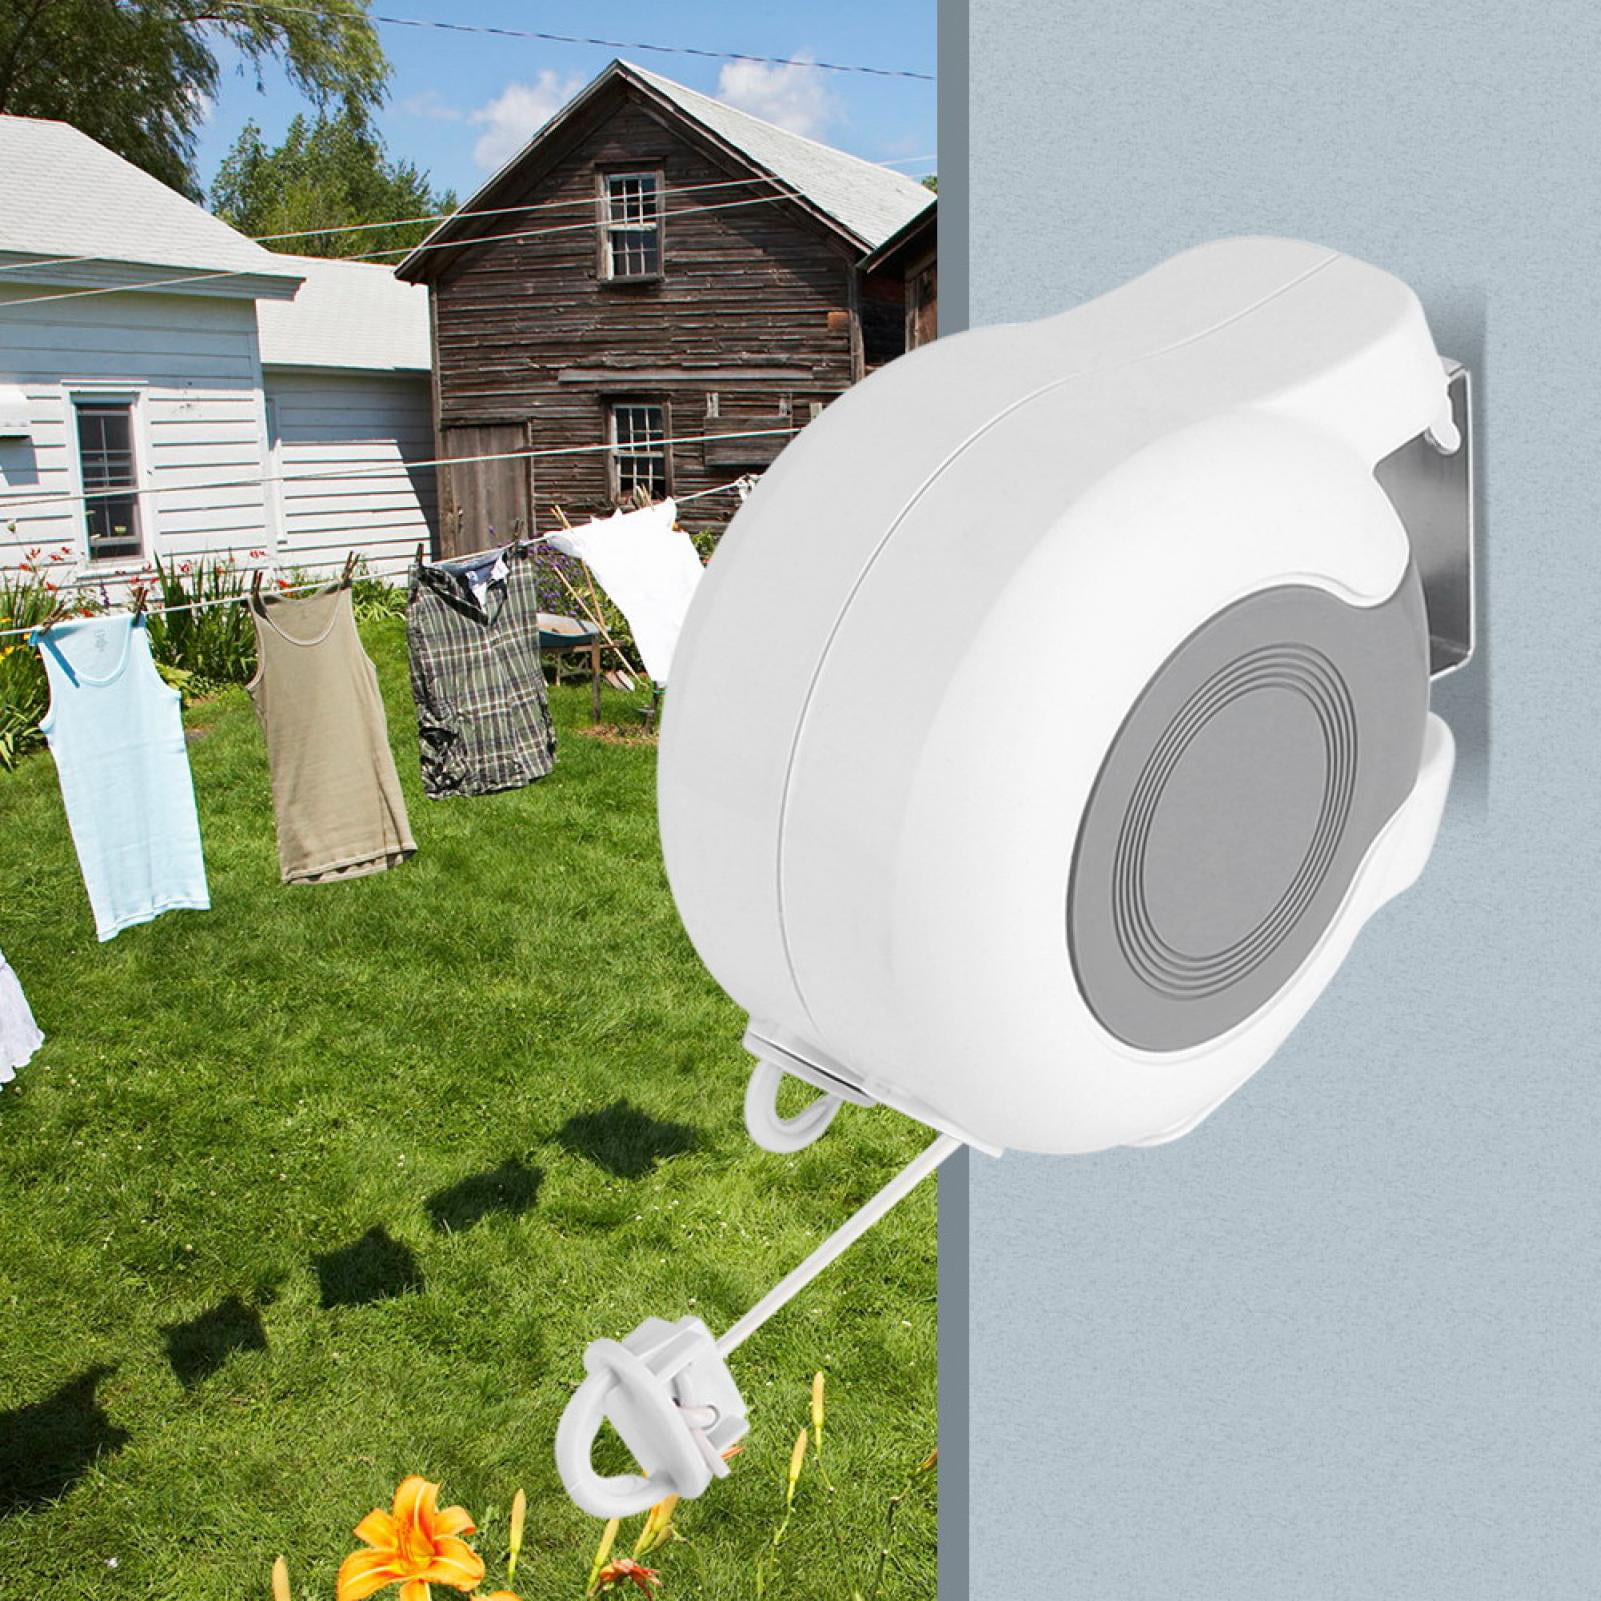 13m Retractable Washing Line for Indoor Outdoor Laundry Drying Wall-Mounted Retractable Double Clothes Drying Line Quick to Install Washing Line Strong Twin Retractable 